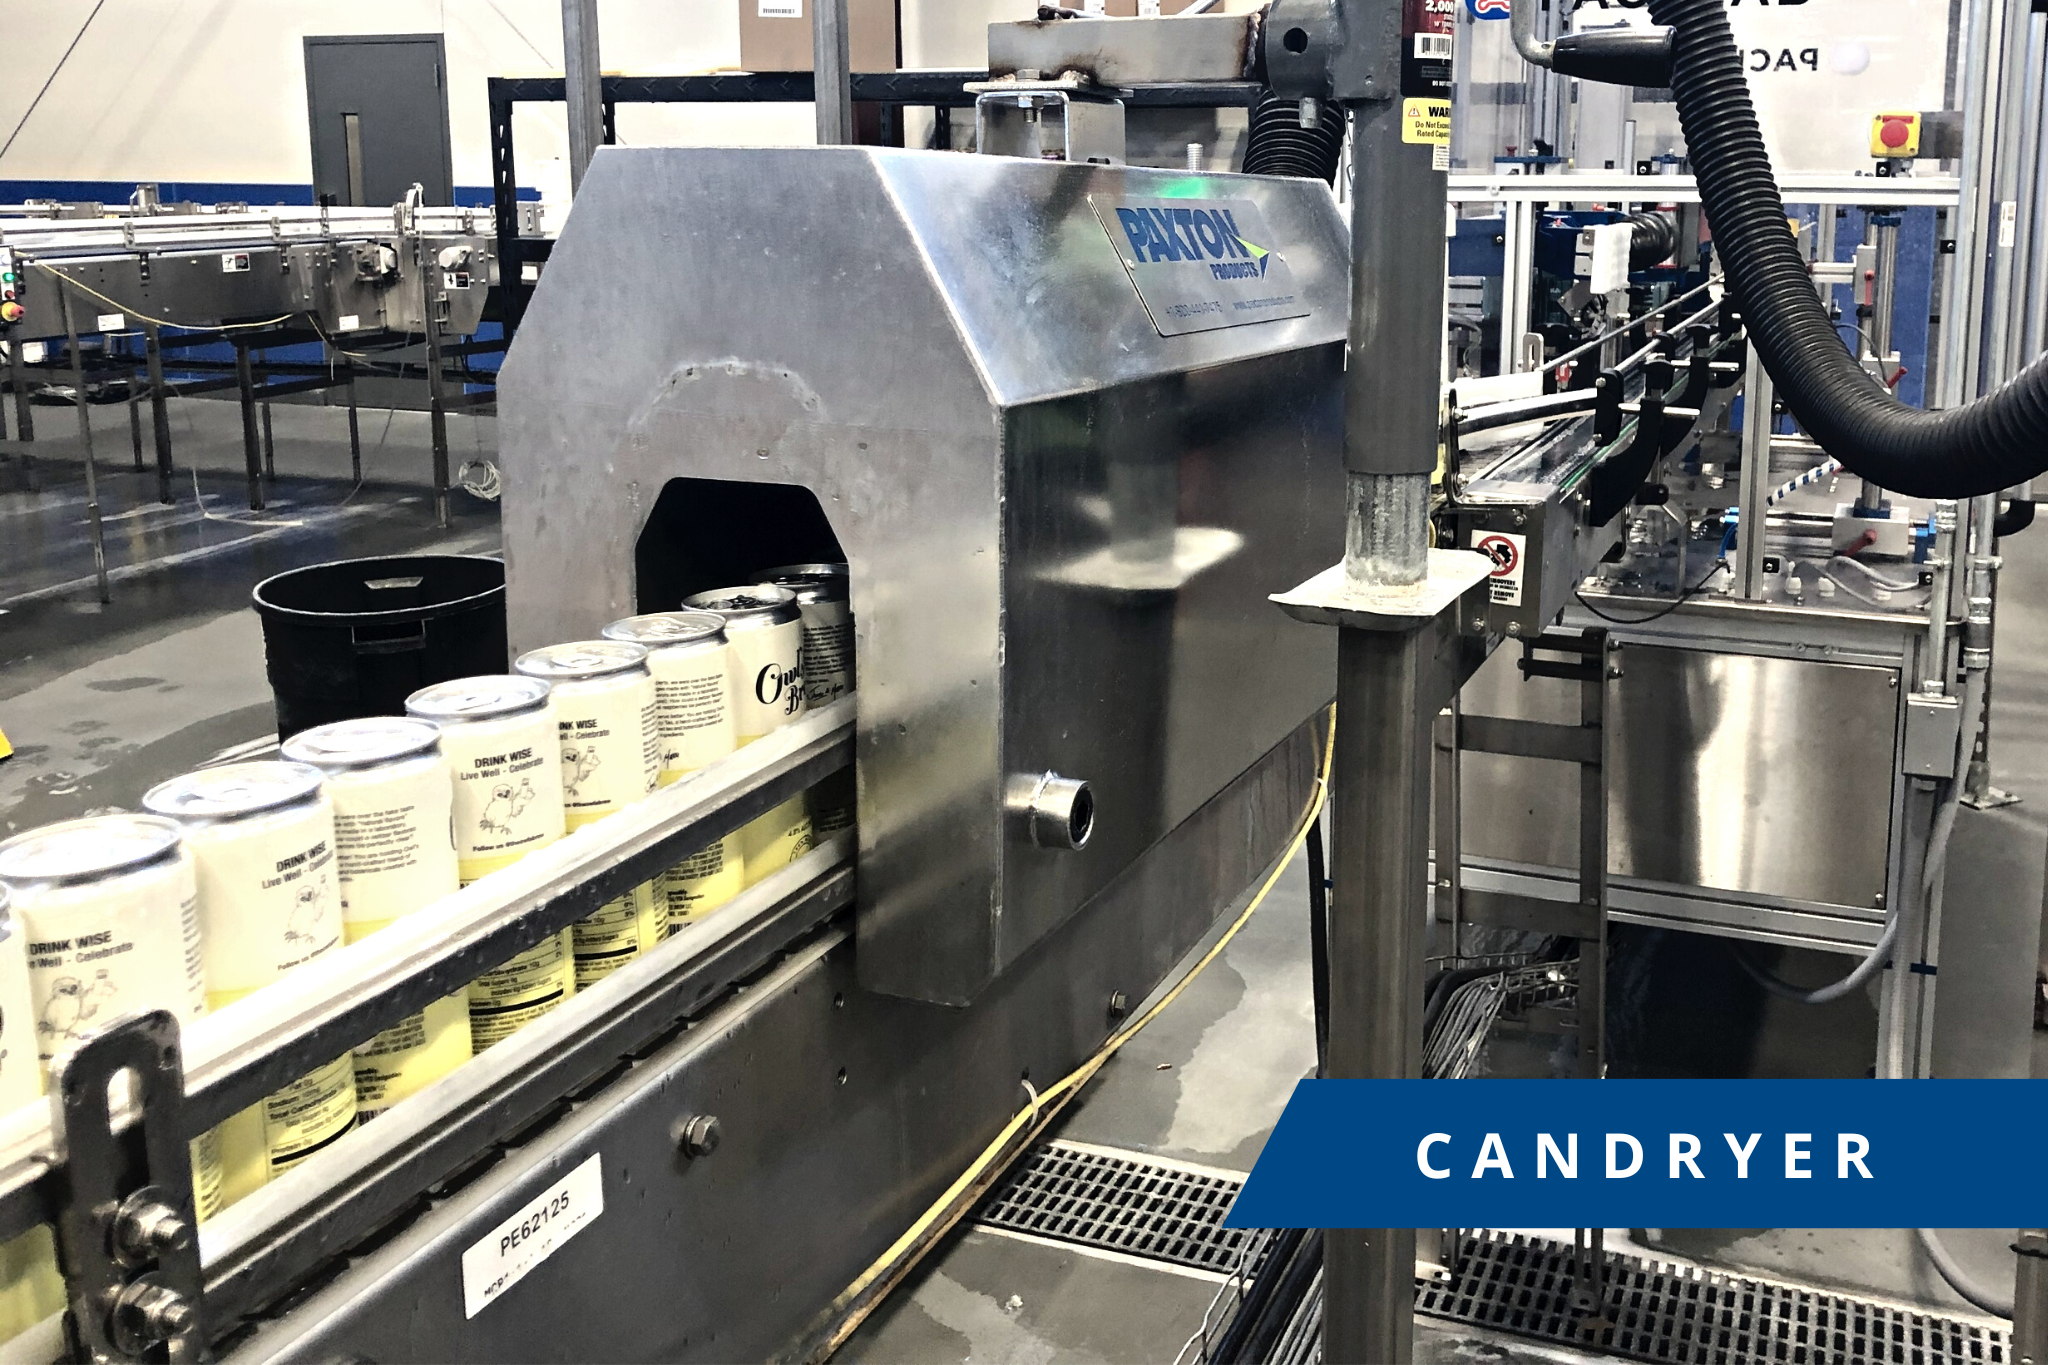 Case Study: Contract Packager Uses Paxton’s CanDryer To Remove Residual Beer And Dry Cans